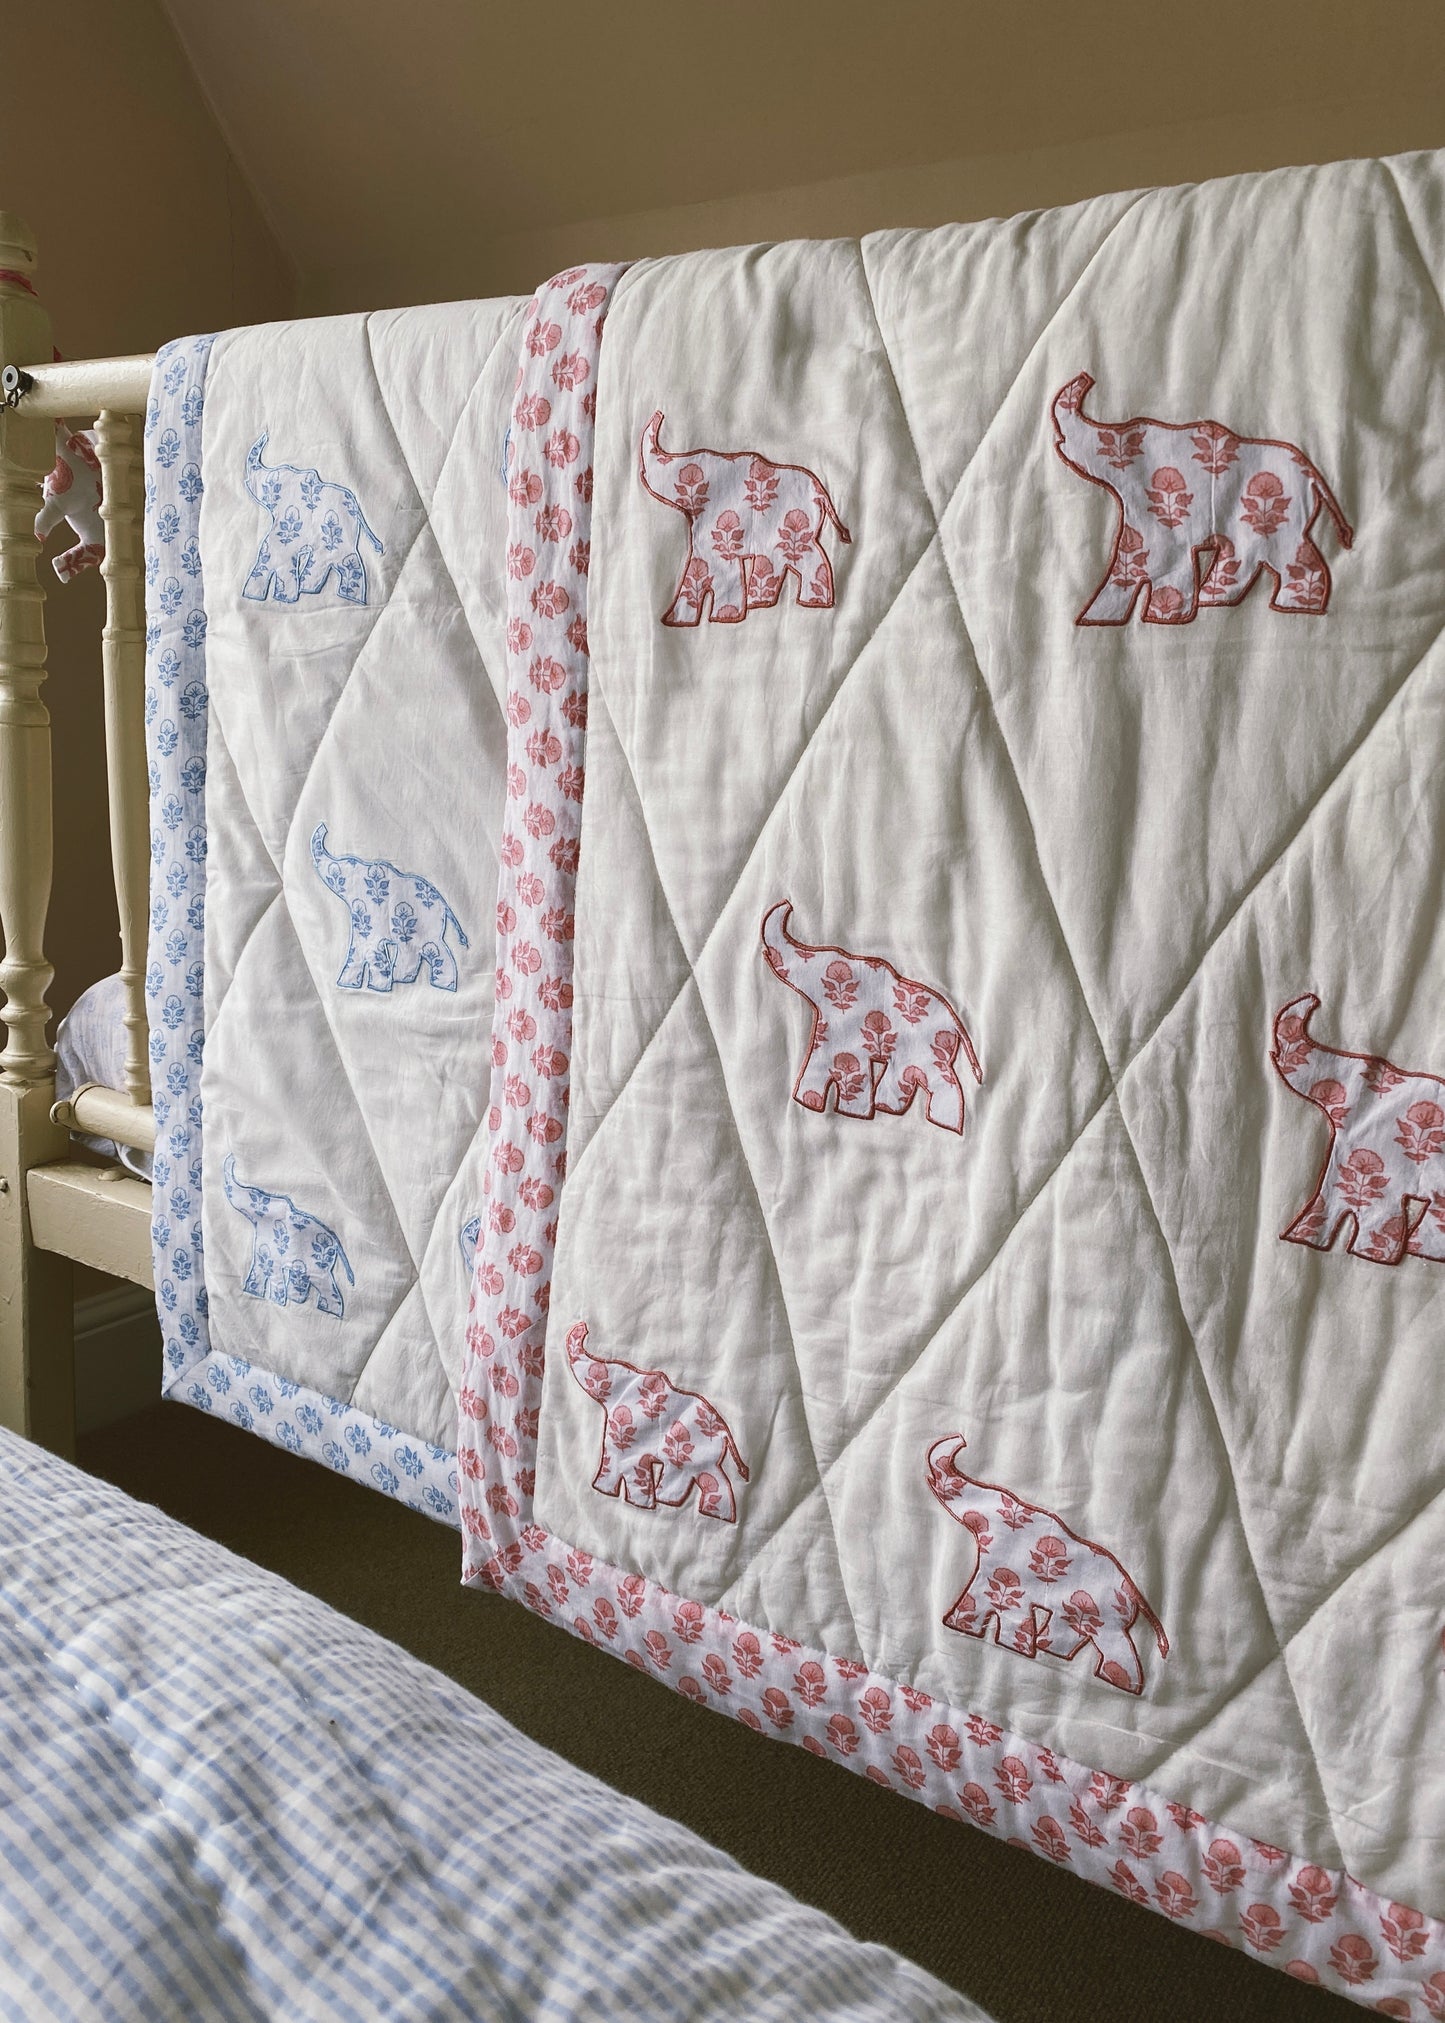 Pink Elephant Baby Quilt